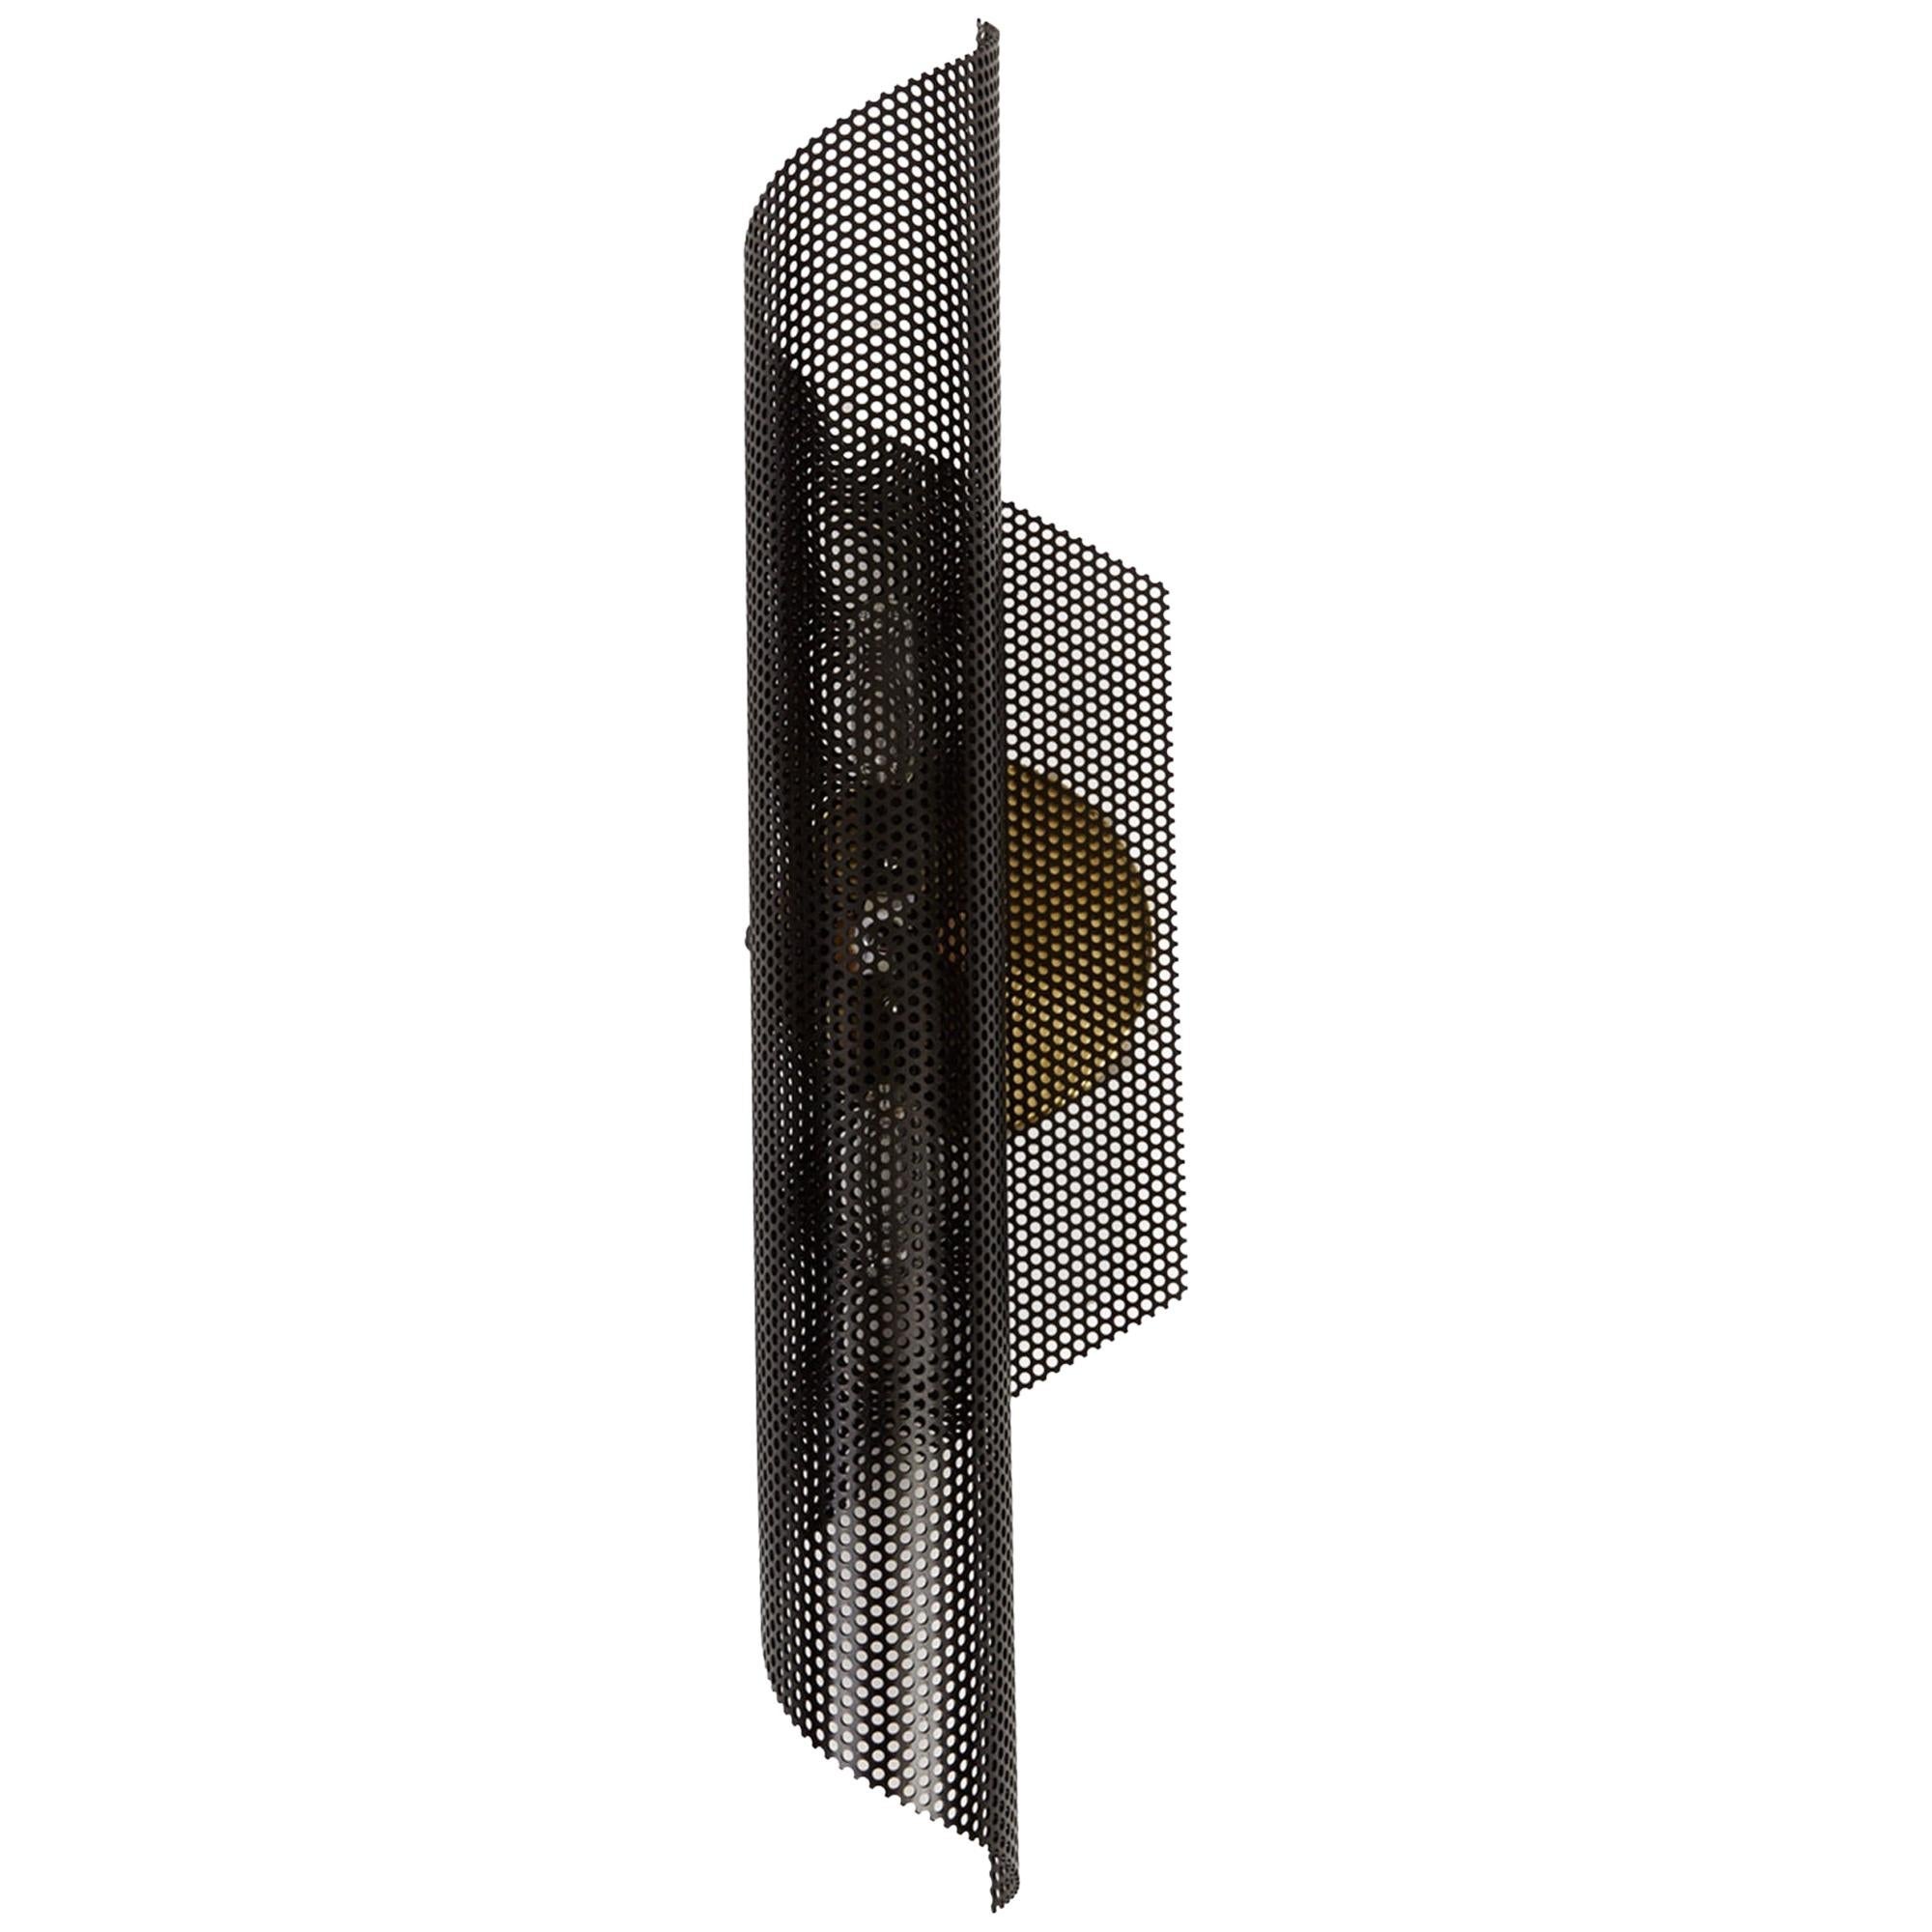 Black Rolled Perforated Sconce by Lawson-Fenning For Sale